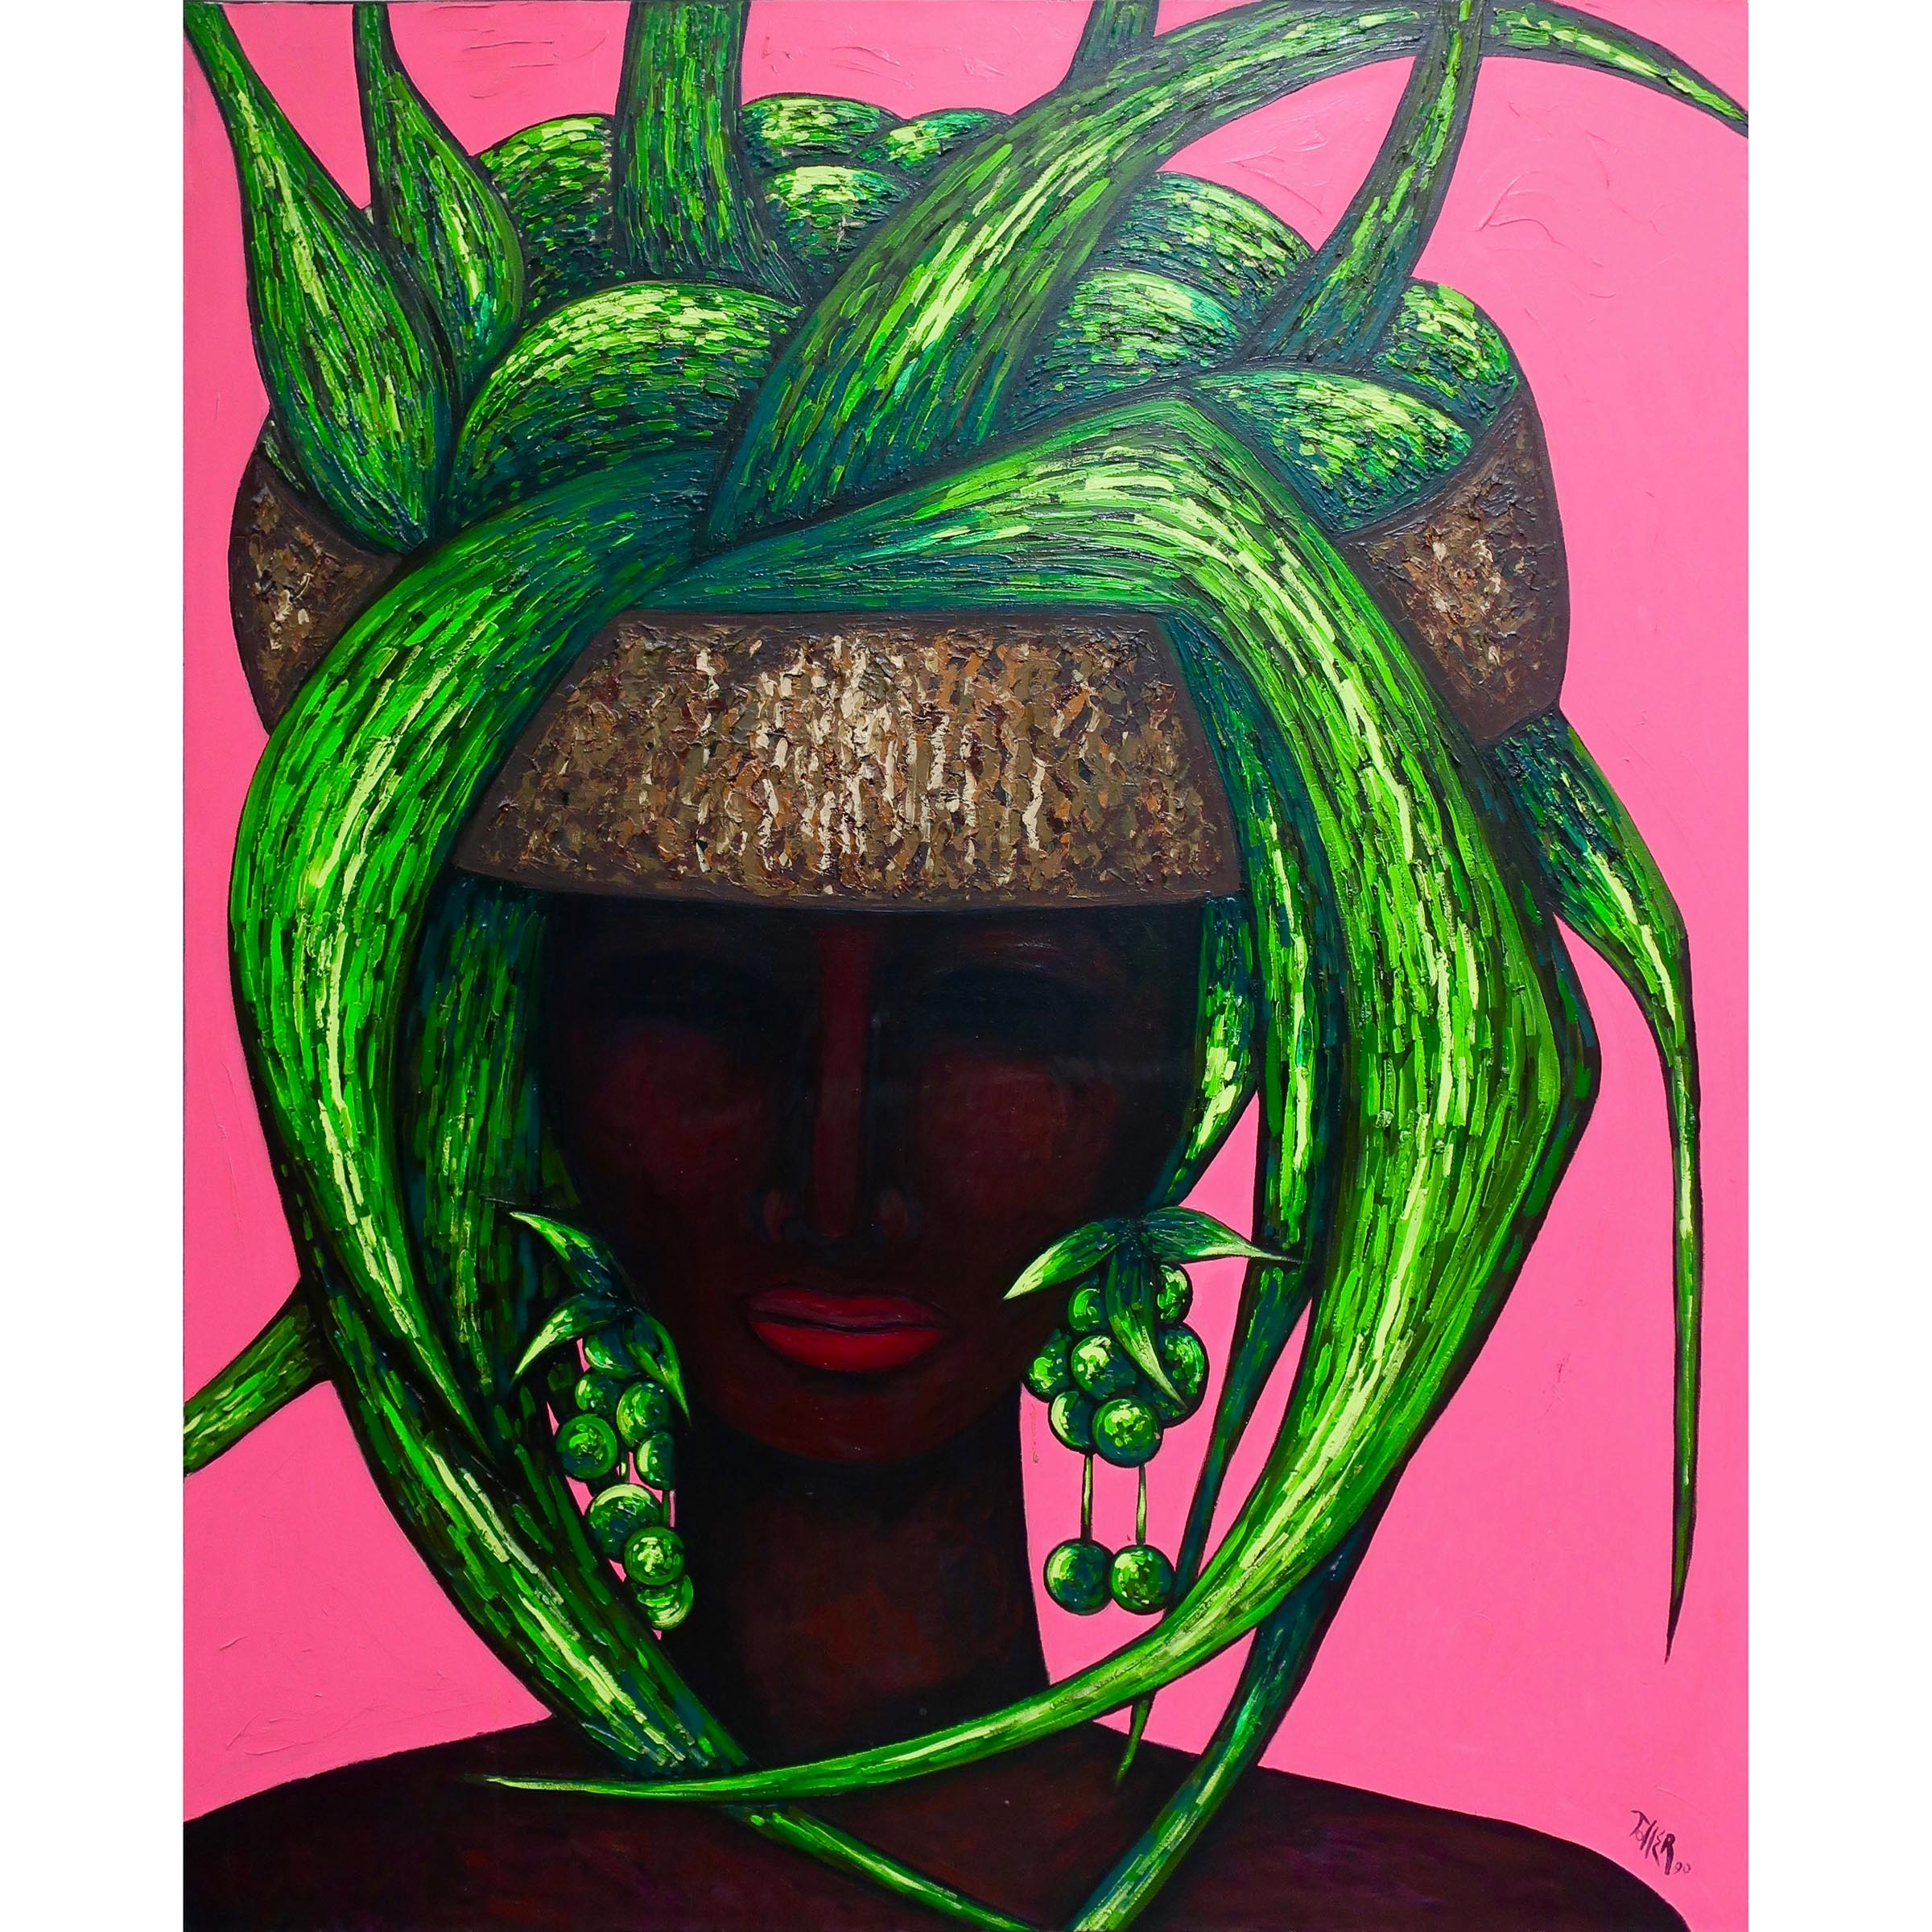 UNTITLED (LADY WITH PLANT HEADDRESS) by Toller Cranston